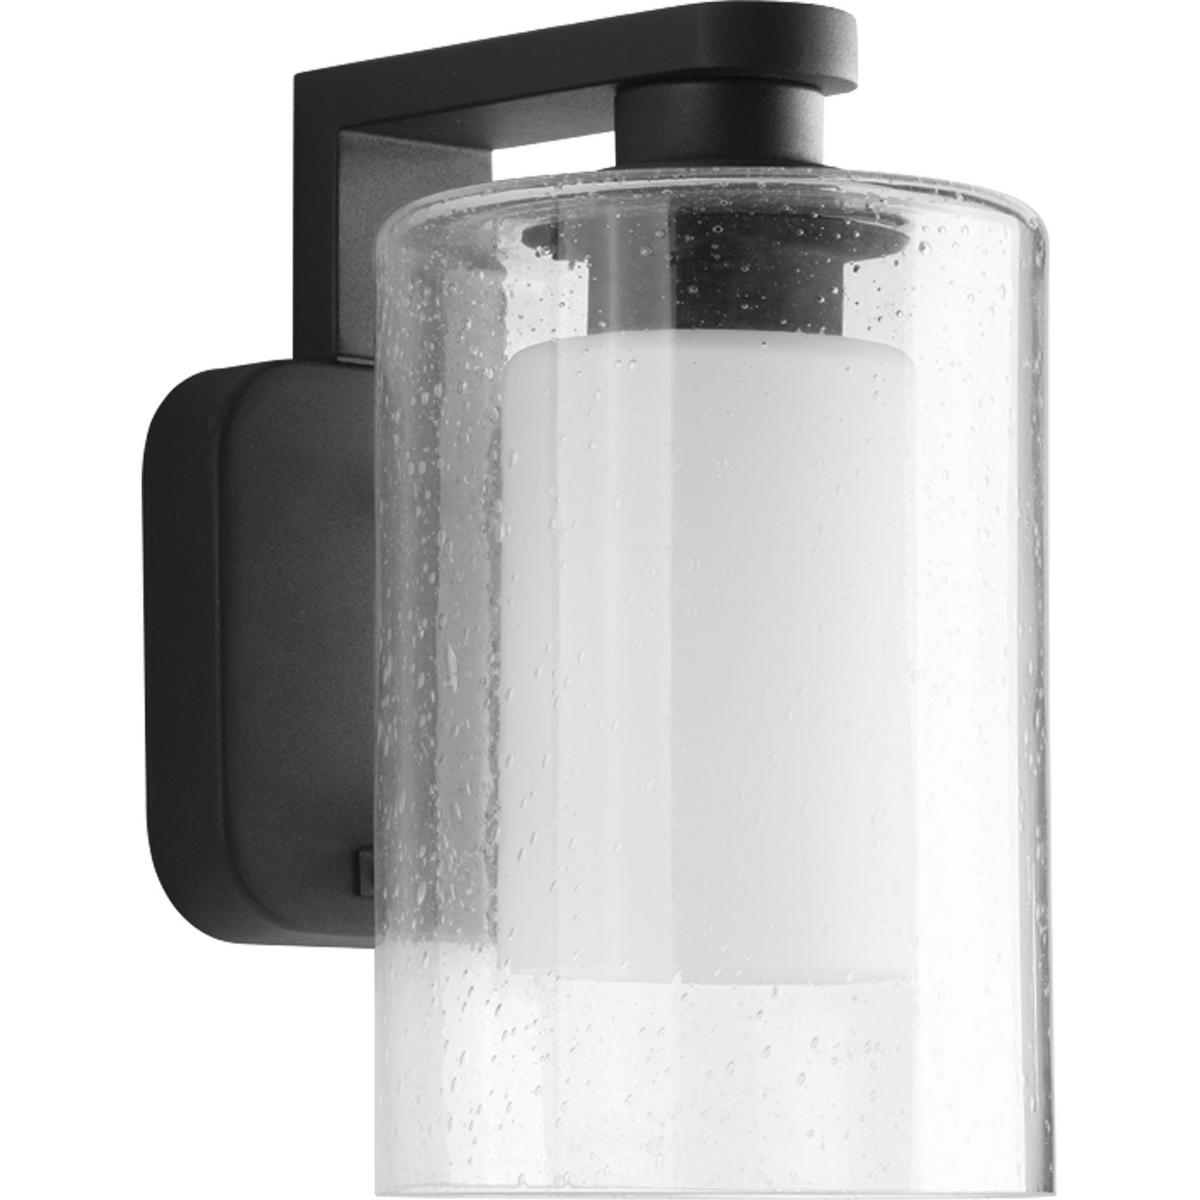 Hubbell P6038-31 Outdoor lighting adds both beauty and enhances the safety of your home or property. Compel is our new outdoor collection featuring modern forms and layered glass. Etched opal glass within a seeded glass shade offers individuals design flexibility, as fixt